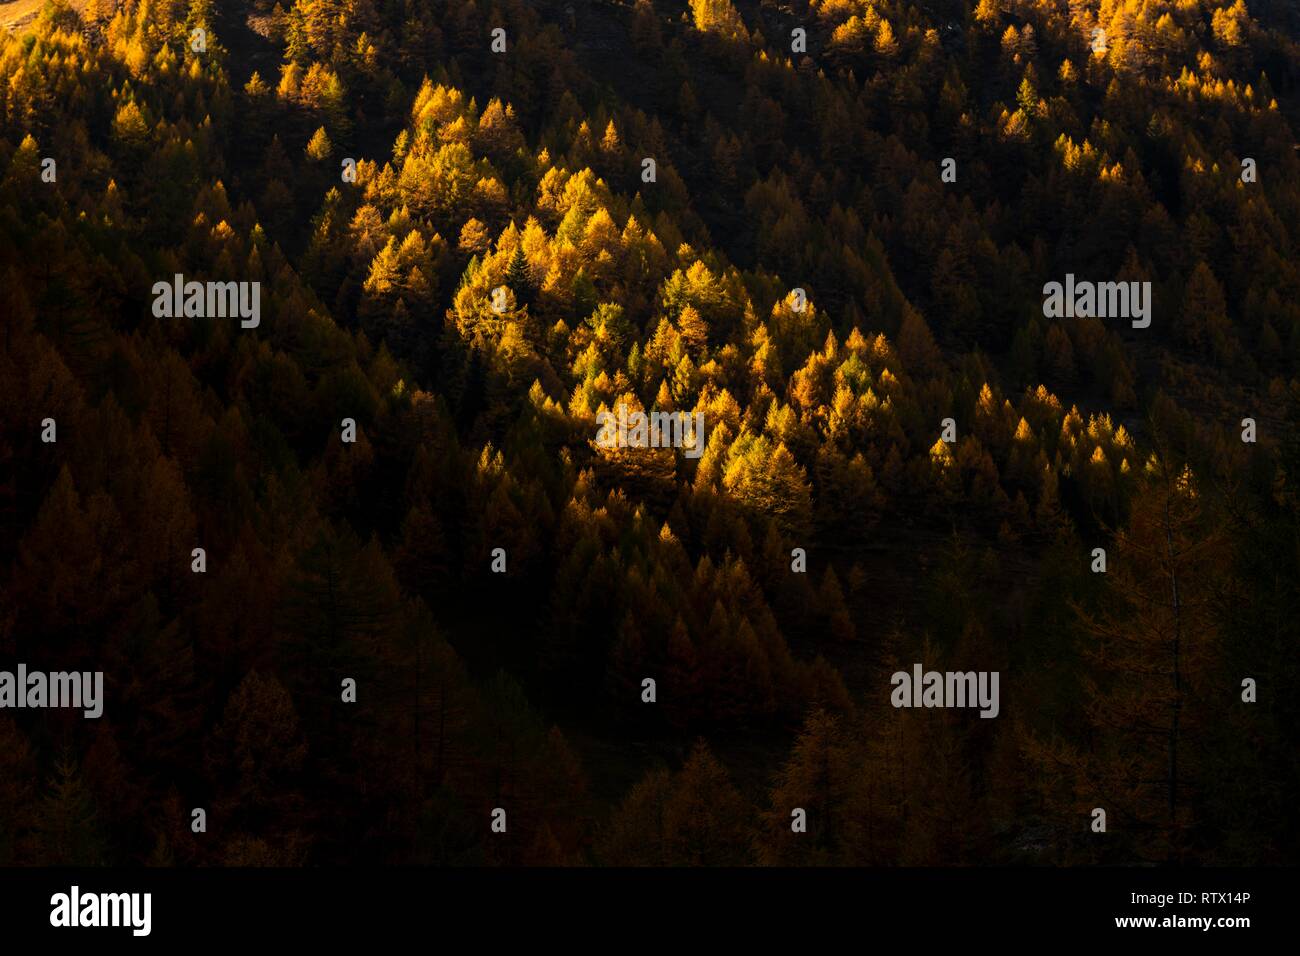 Autumn mountain larch forest (Larix decidua) with light and shade, Vals, Valstal, South Tyrol, Italy Stock Photo